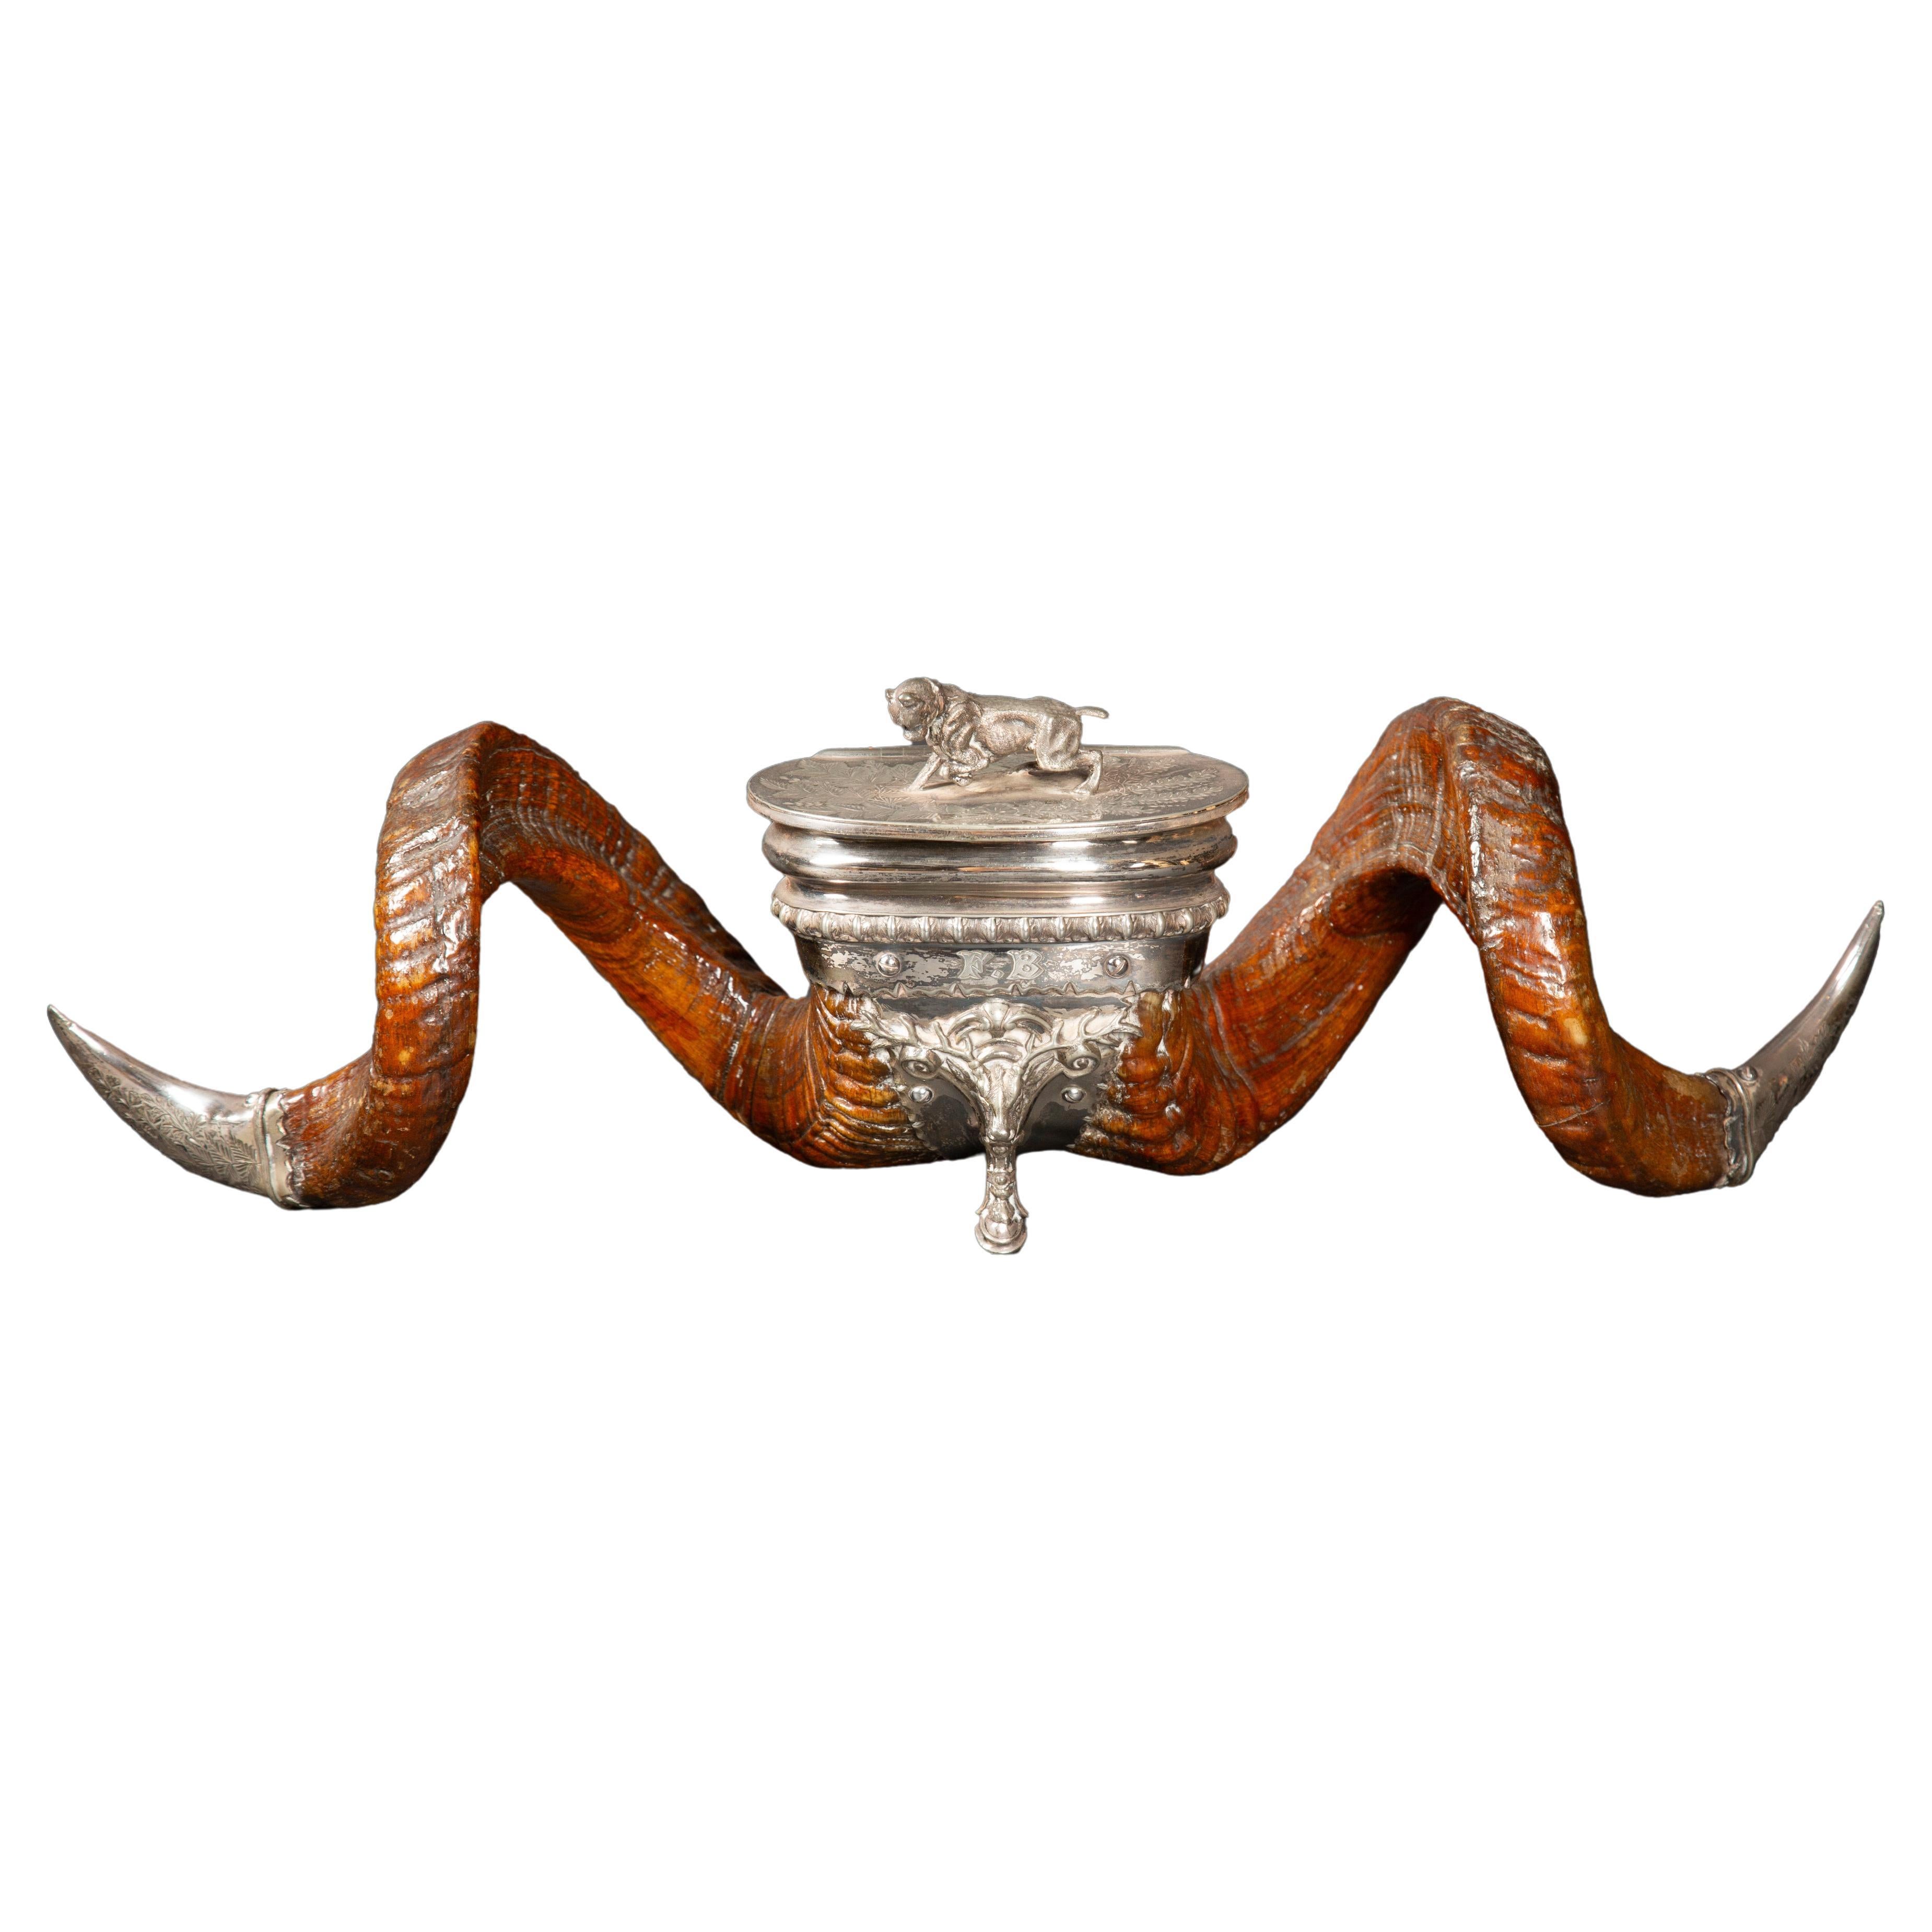 A Victorian Ram's Horn Snuff Mull with Mounts Marked- Walker & Hall